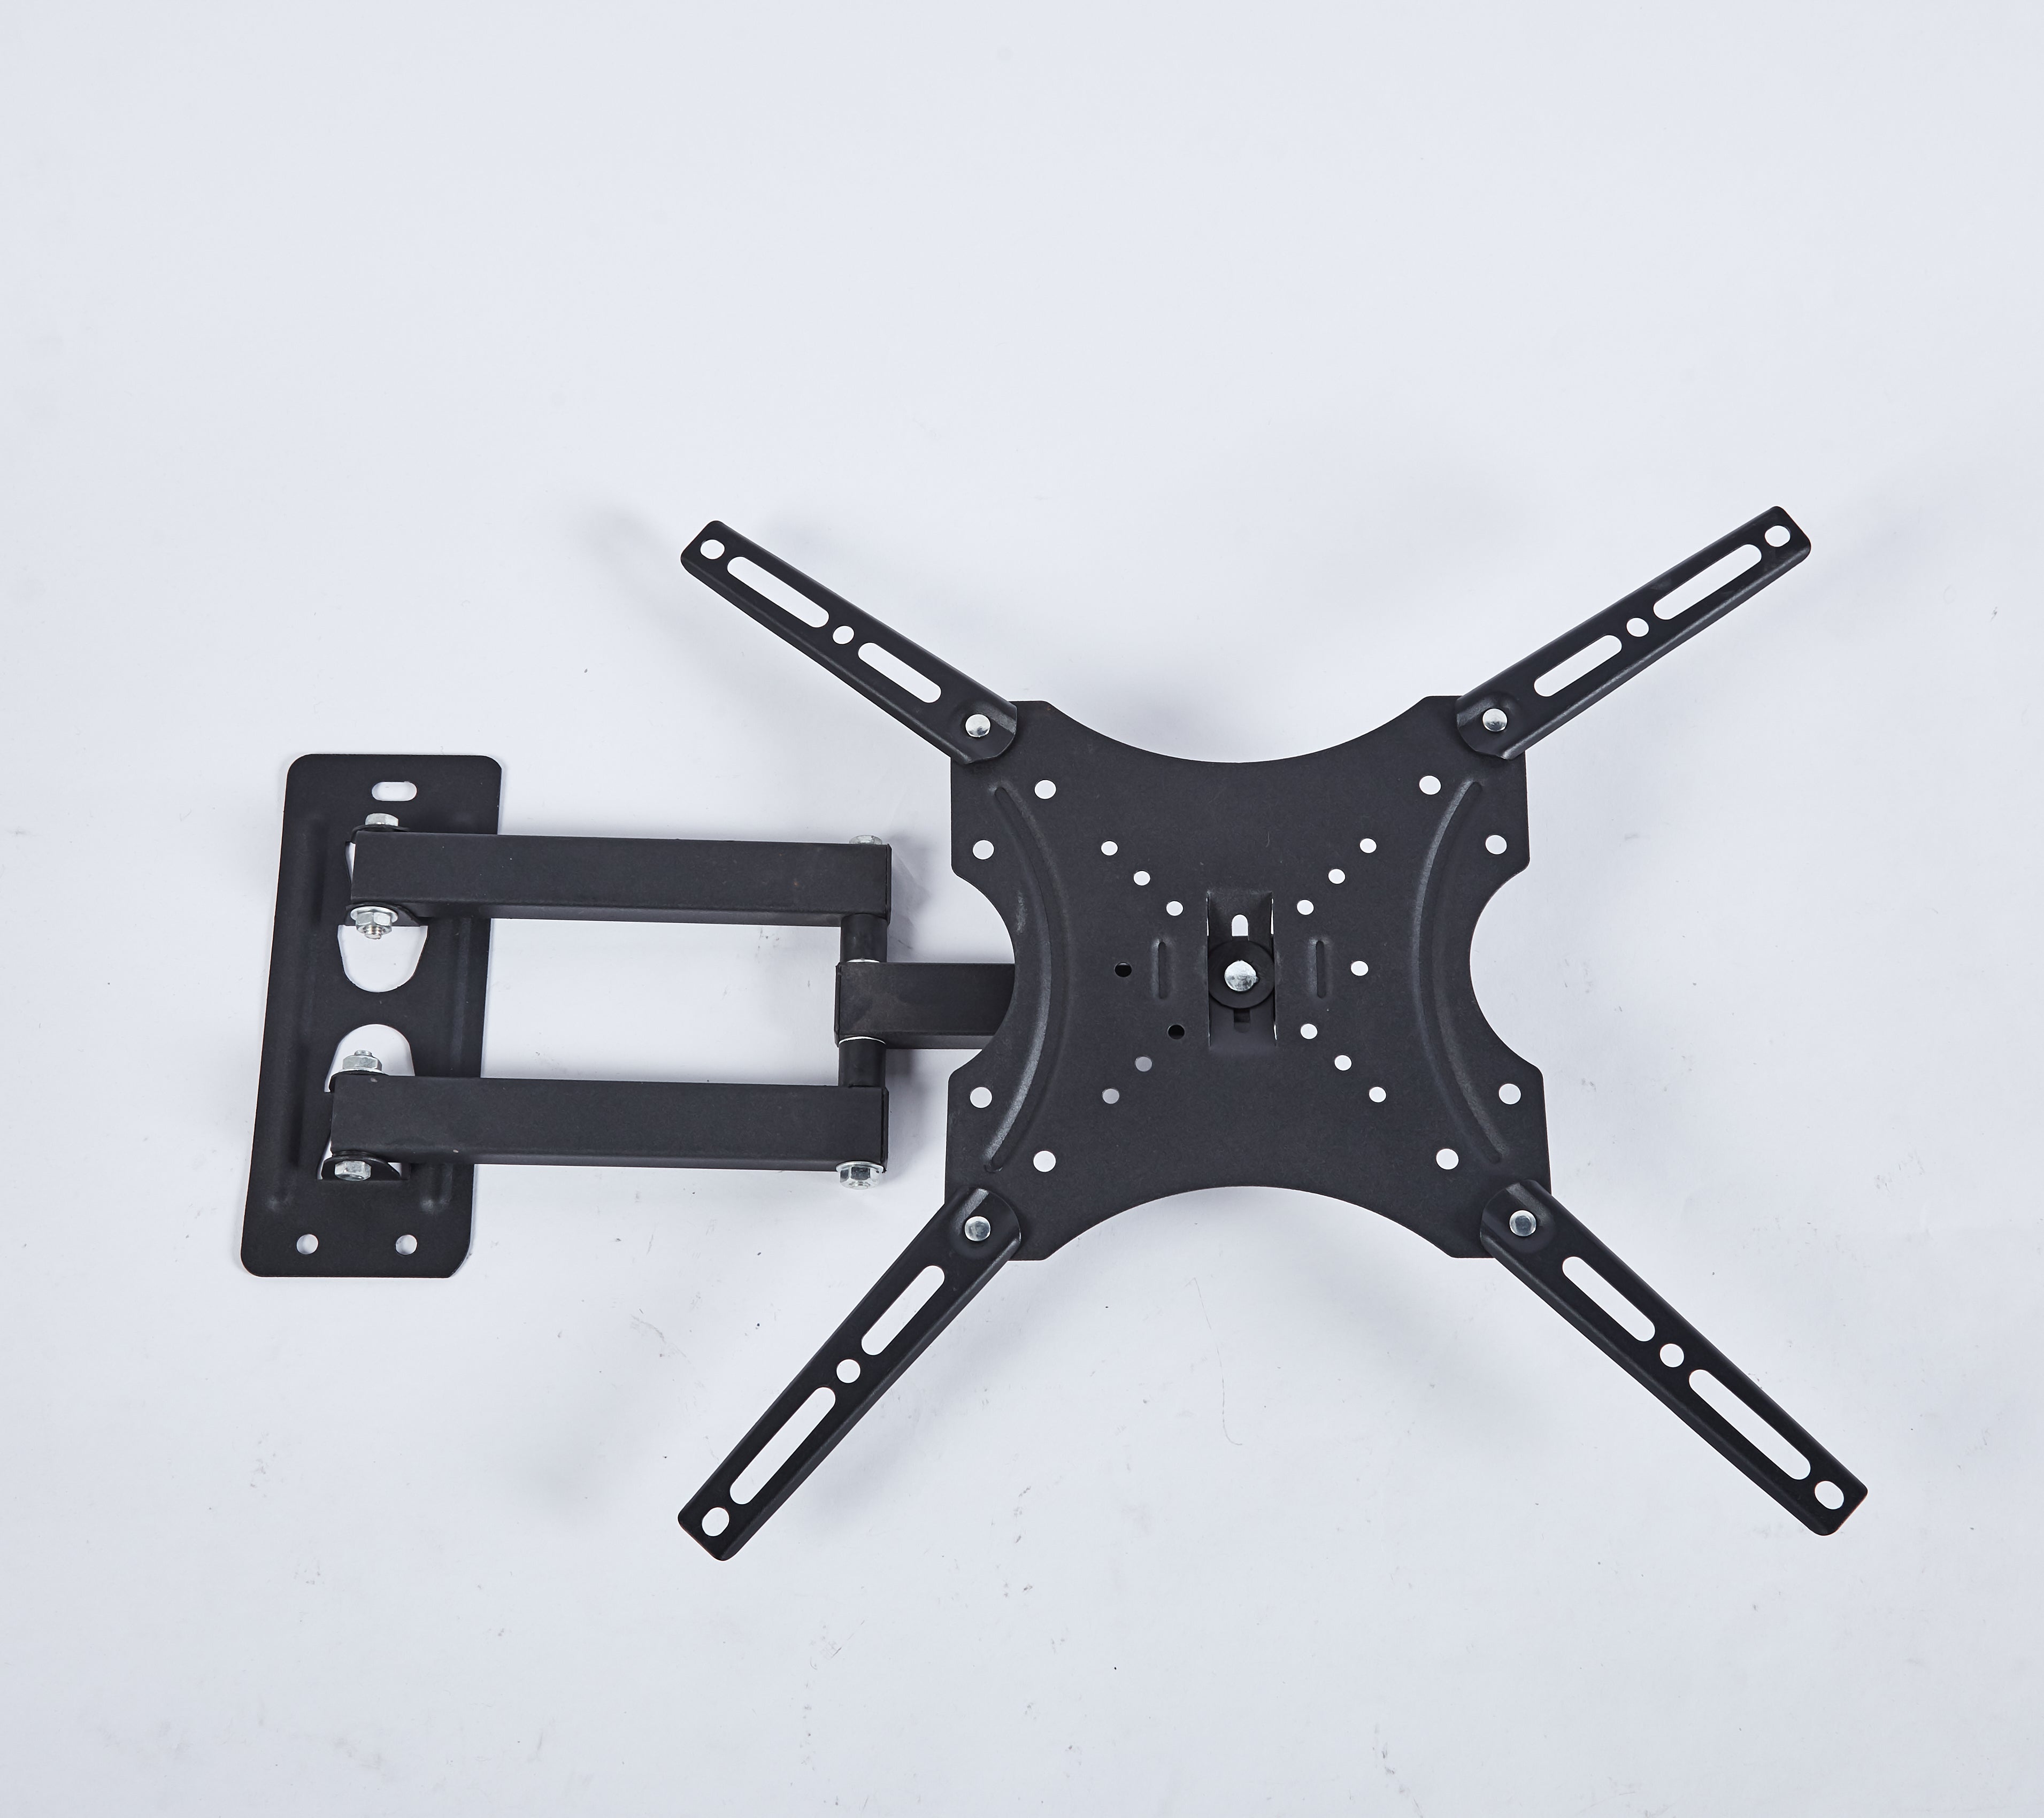 Full Motion Wall Mount Bracket for 32 inch to 55 inch TVs TV-011